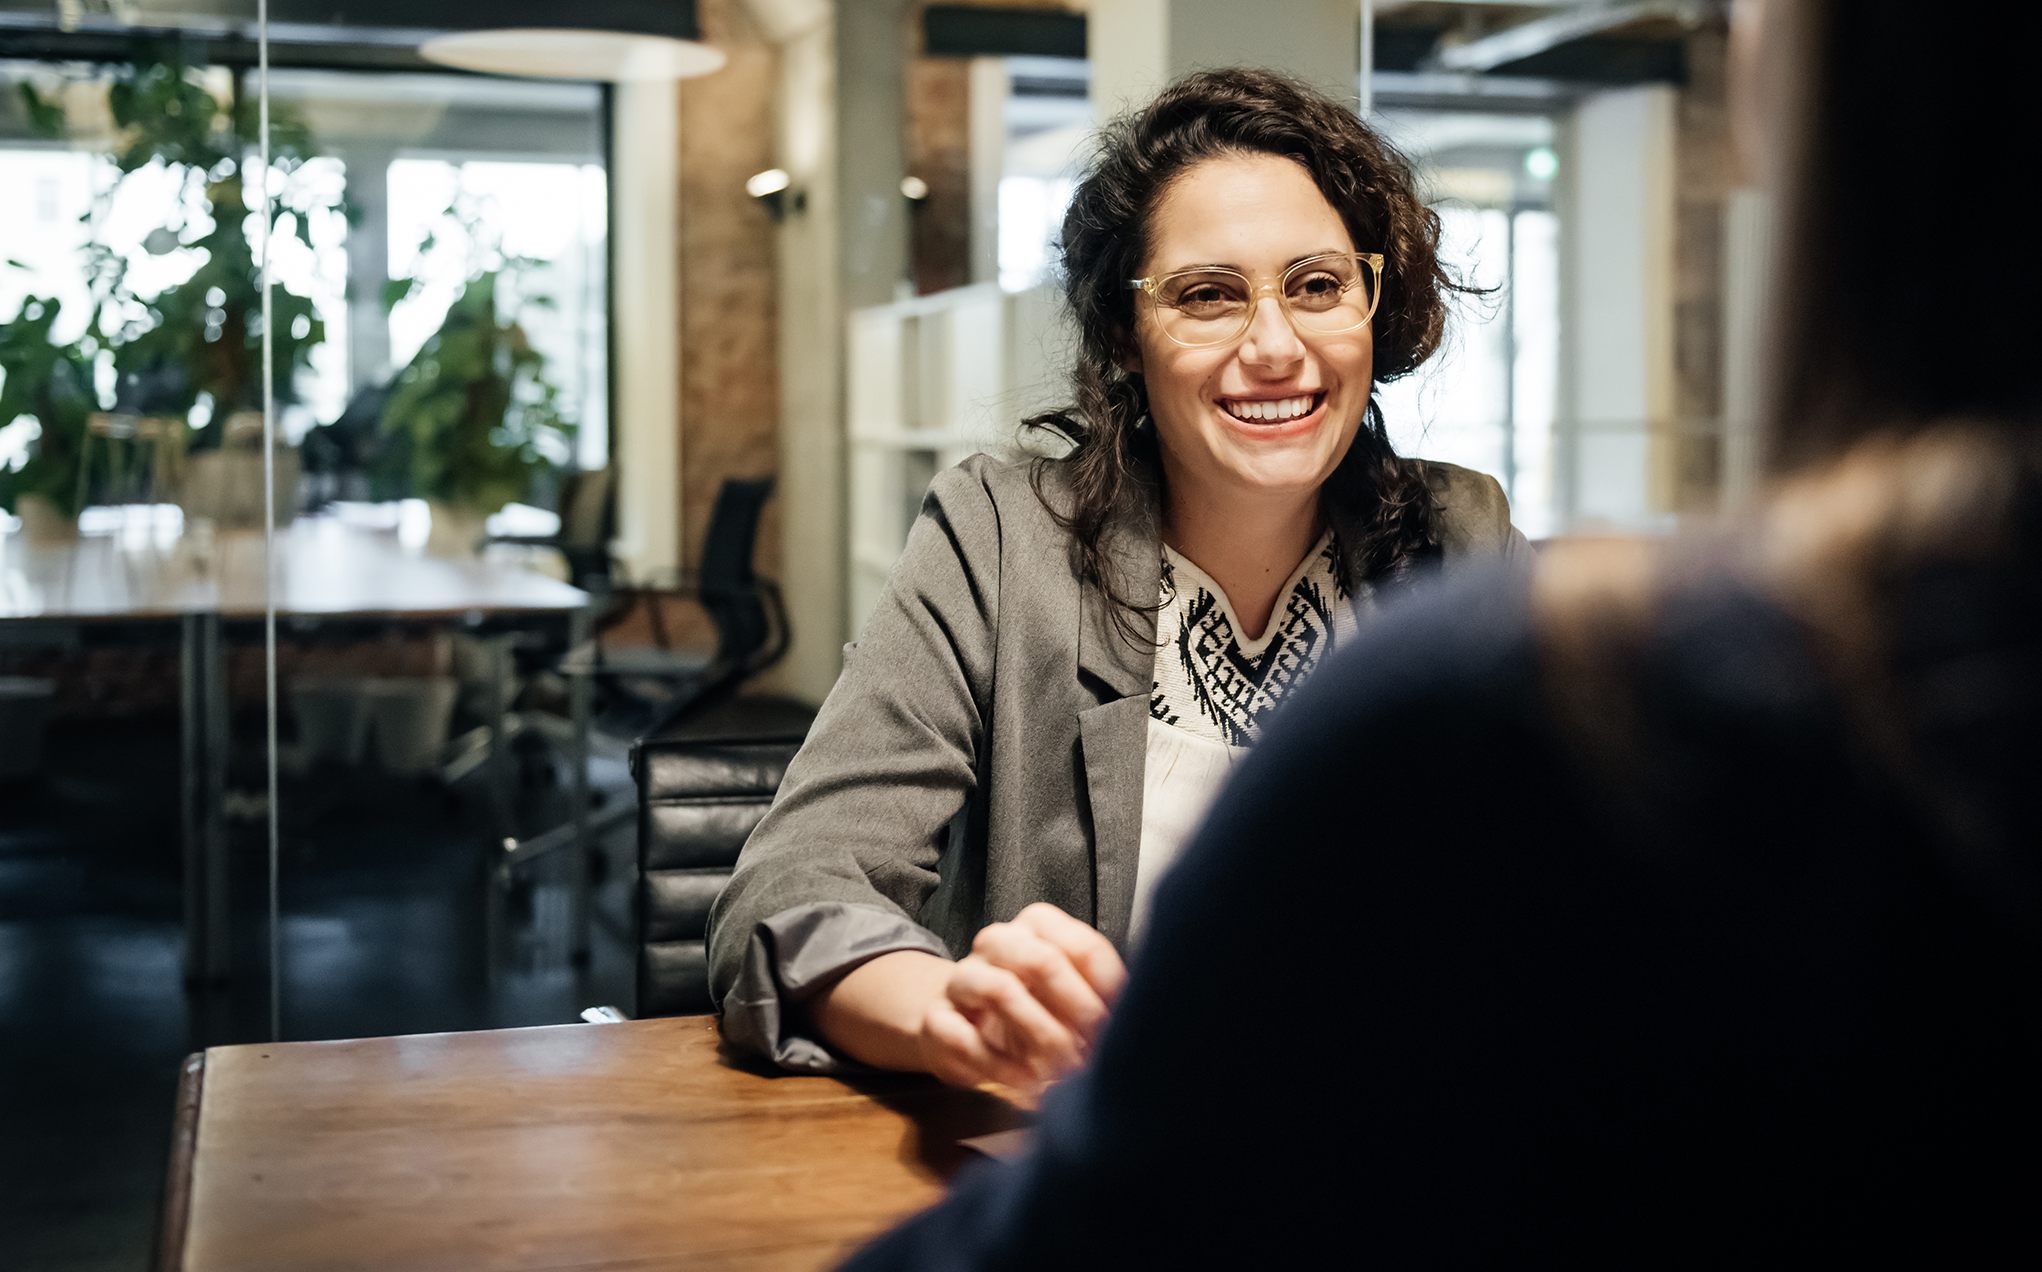 A woman with dark hair and glasses is sitting at a table during a business meeting. She seems happy and is smiling.